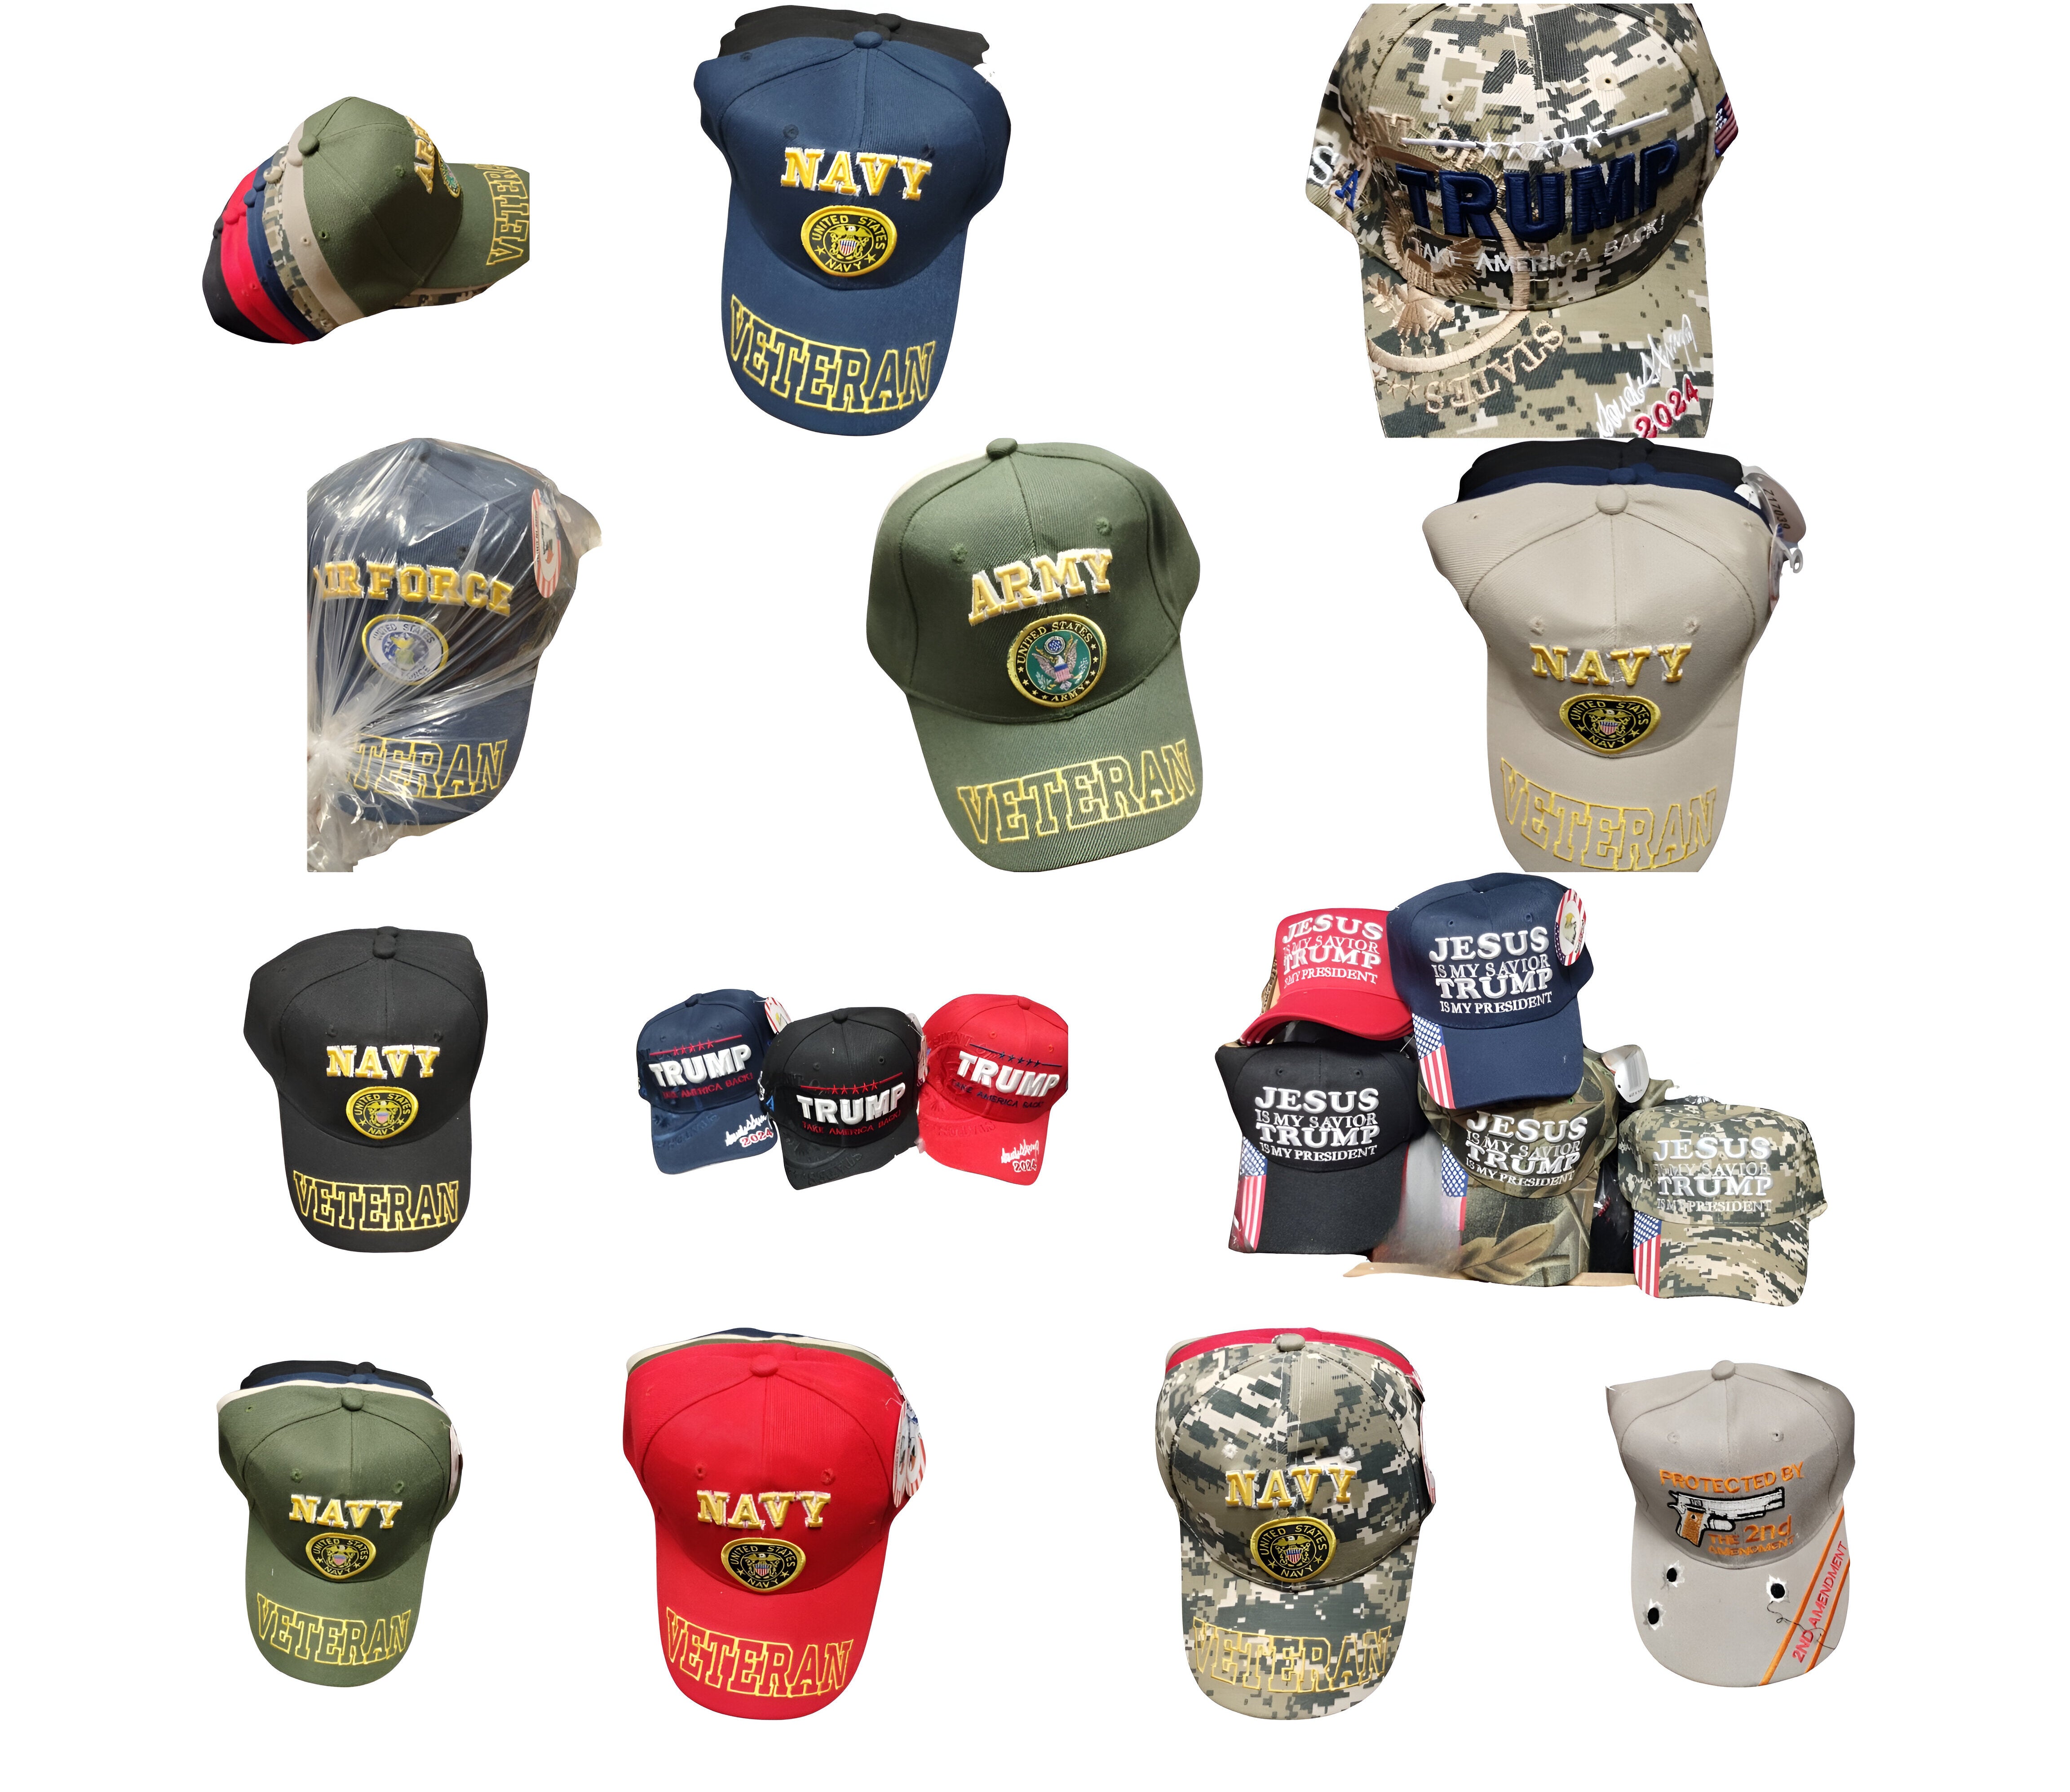 Assorted Patriot/Conservative Design Caps | Wear Your Values with Style